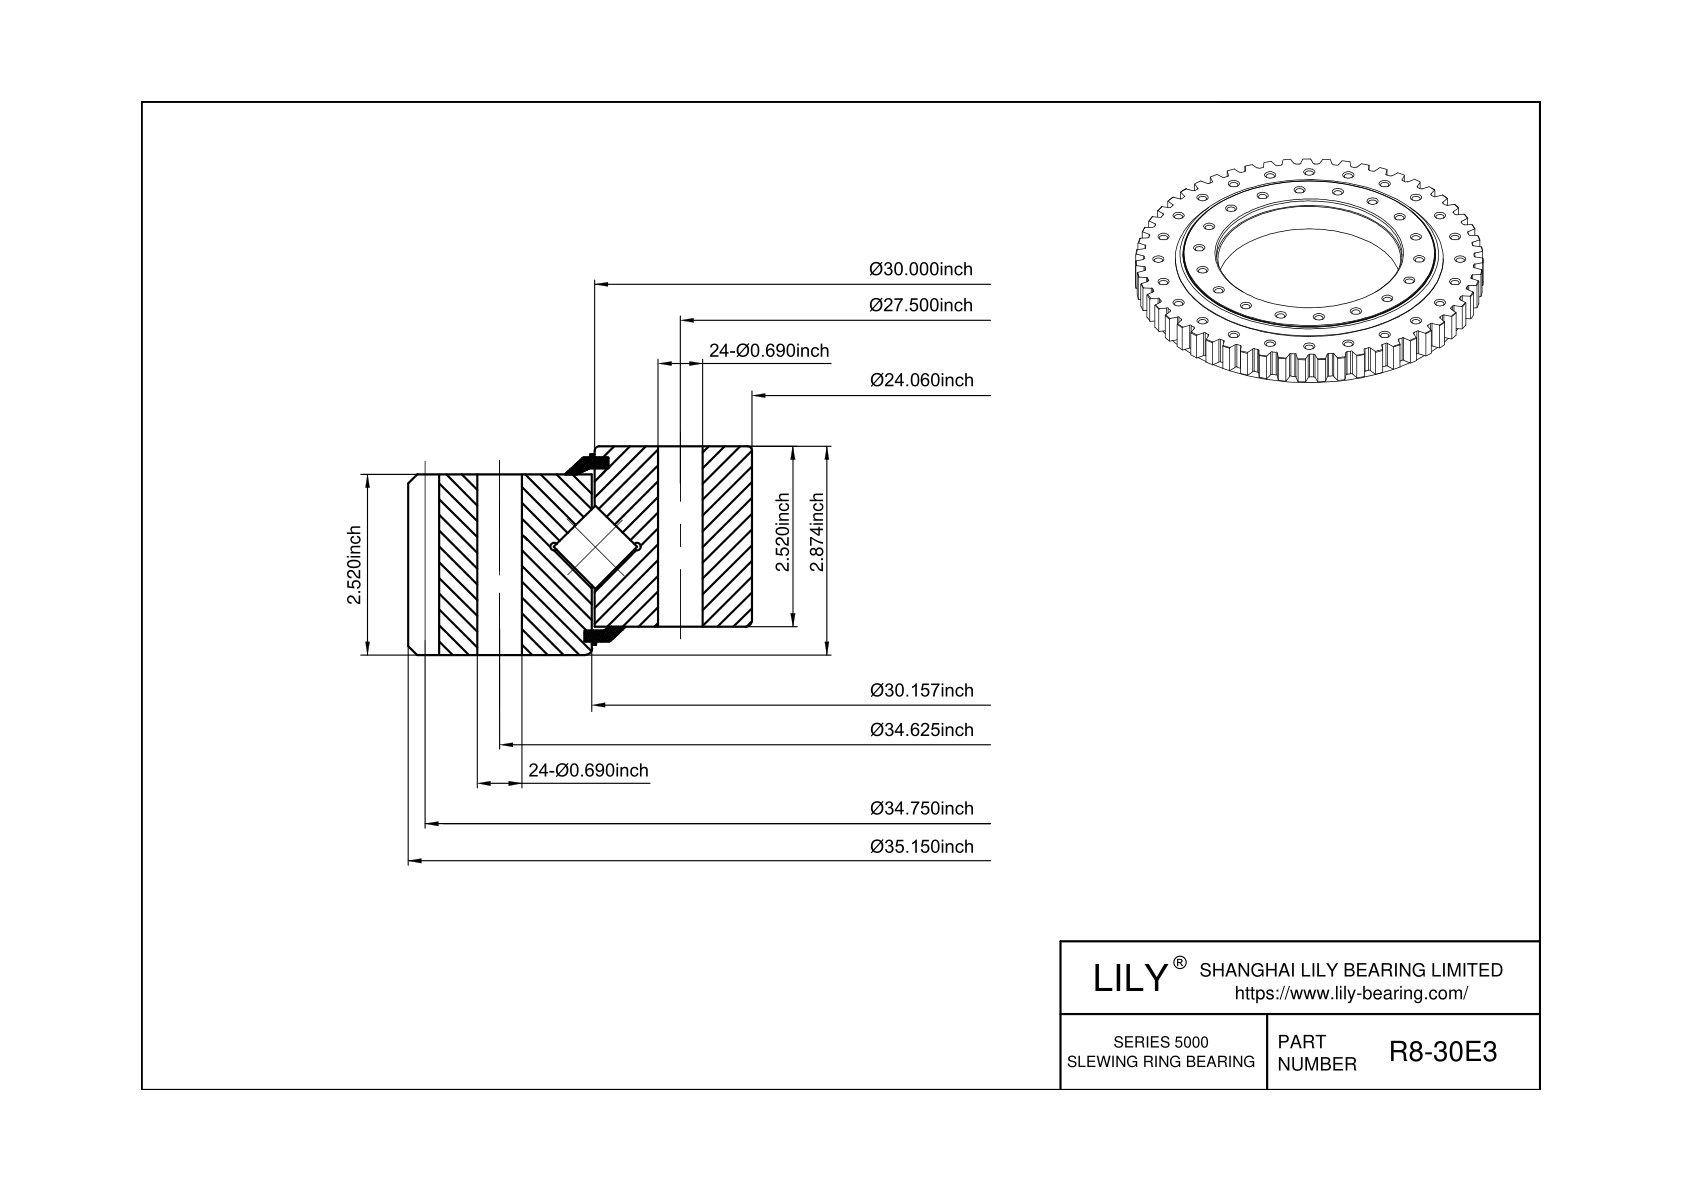 R8-30E3 Cross Roller Slewing Ring Bearing cad drawing